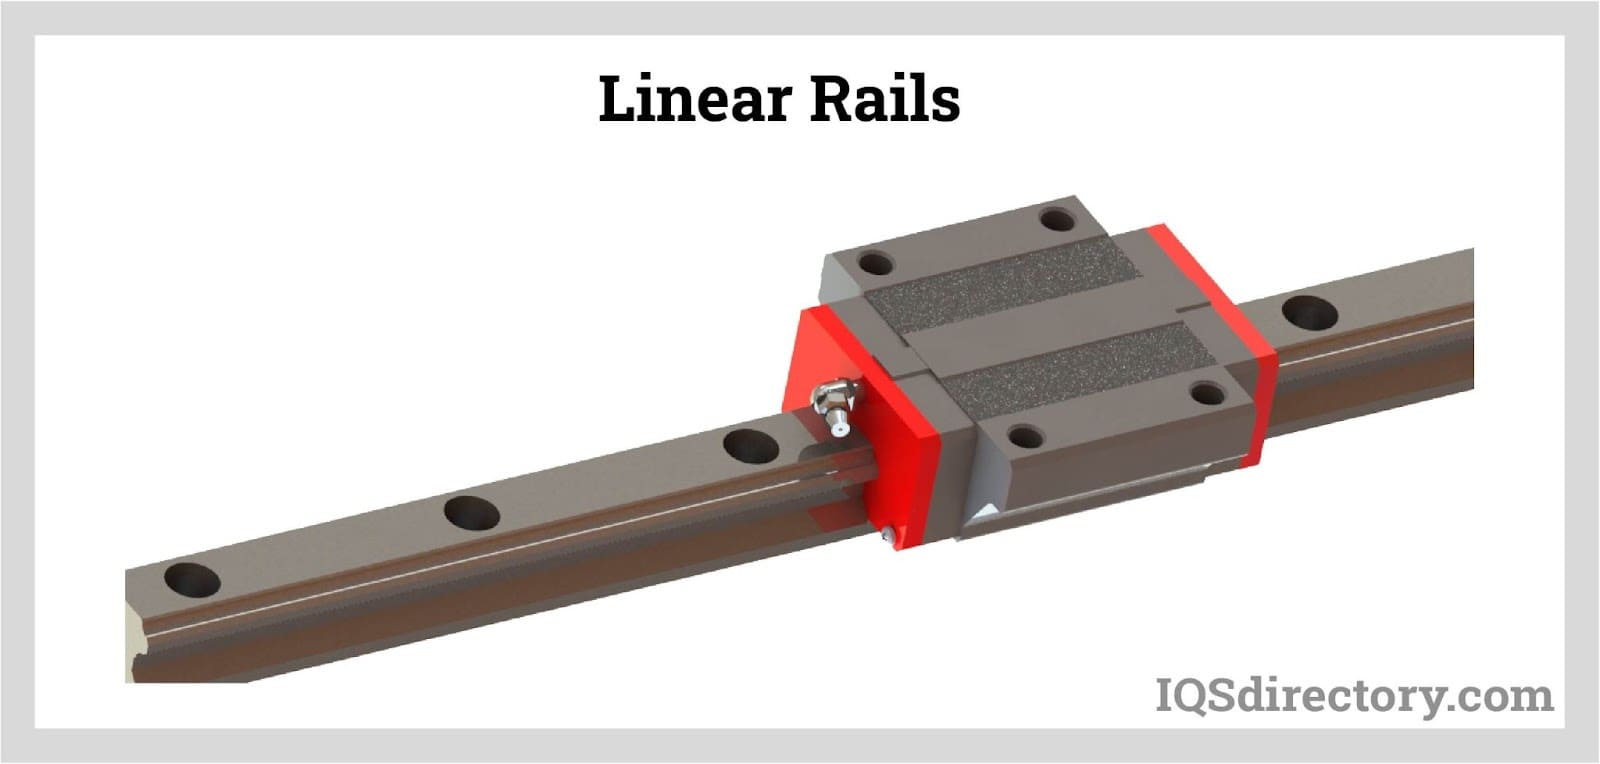 Linear Rails: Types, Applications, Benefits, and Design - IQS Directory